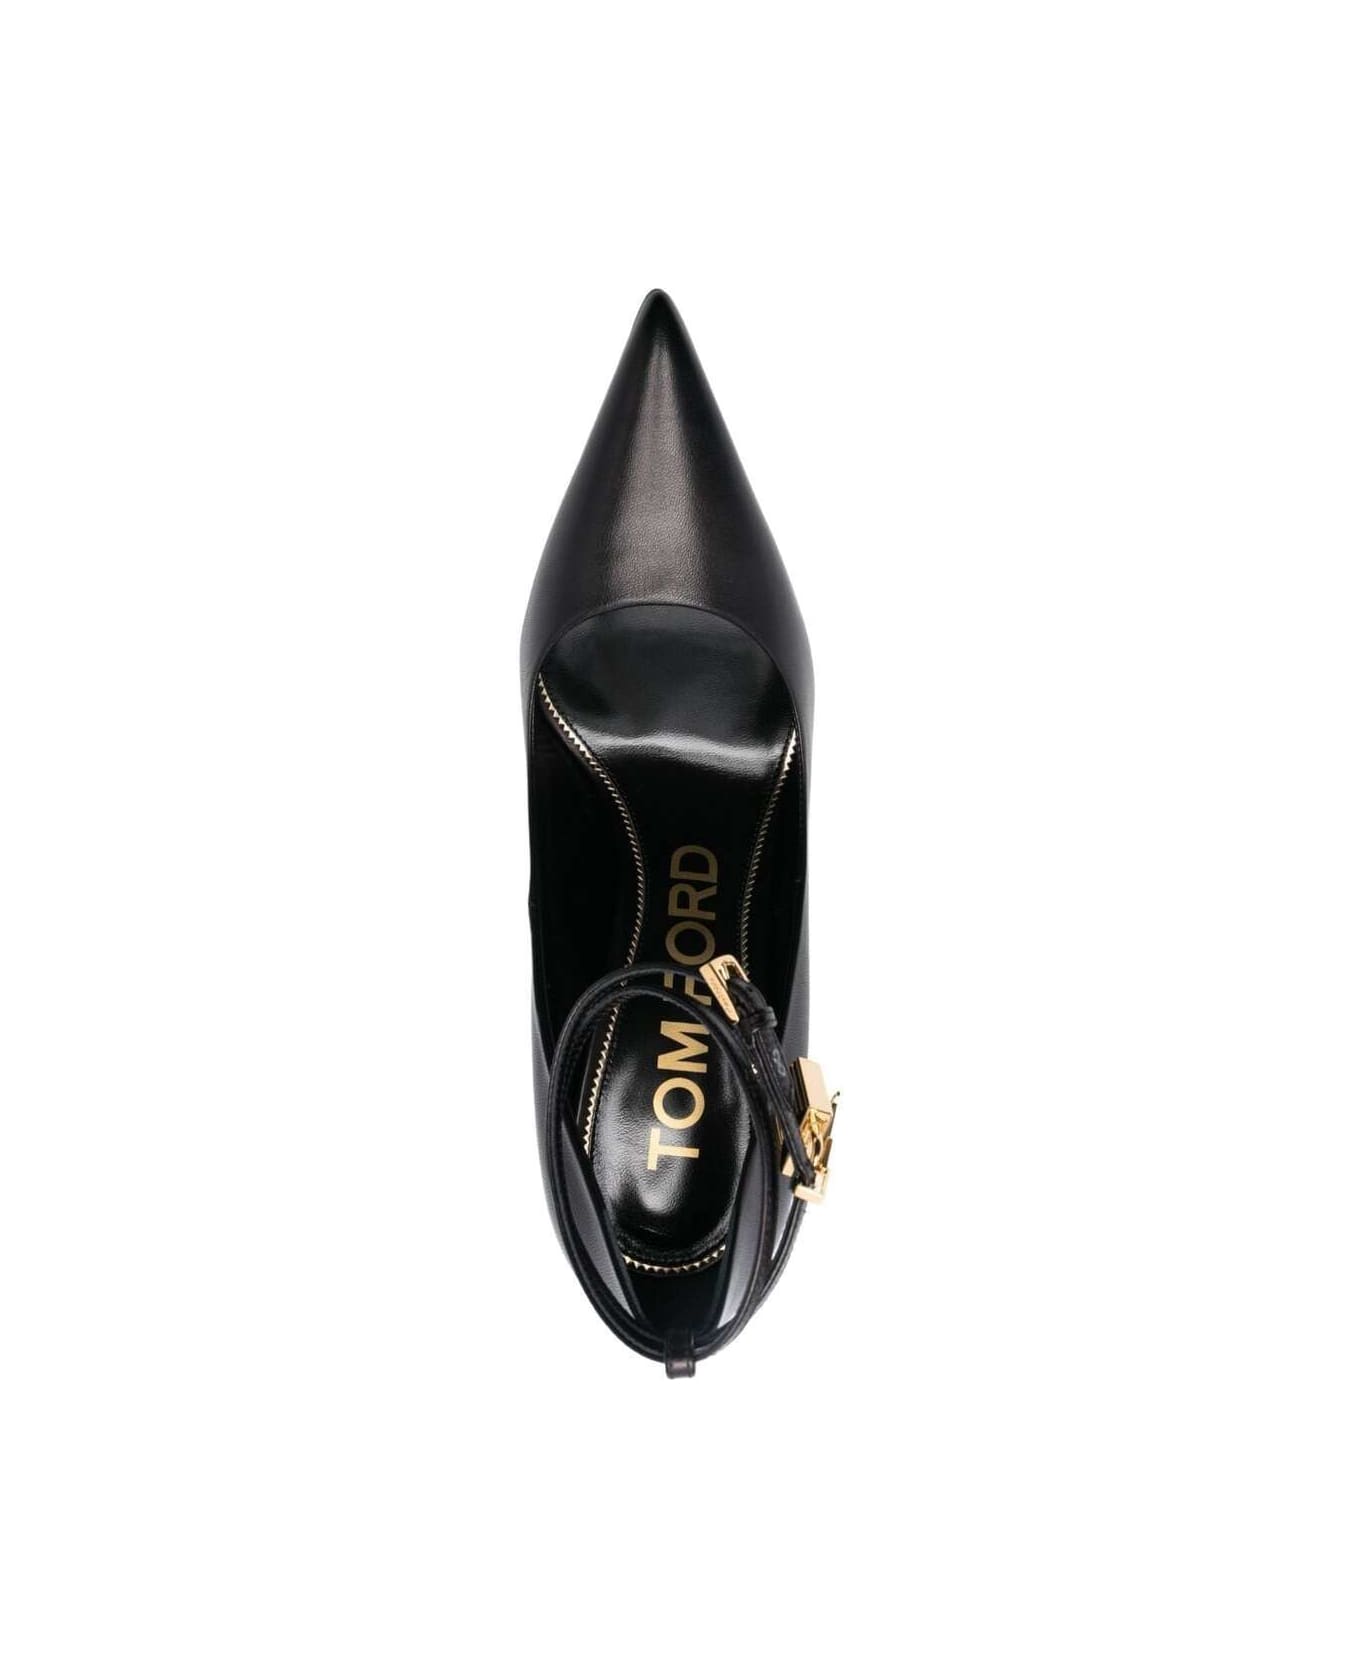 Tom Ford Black Pumps With Padlock Detail In Smooth Leather Woman - Black ハイヒール